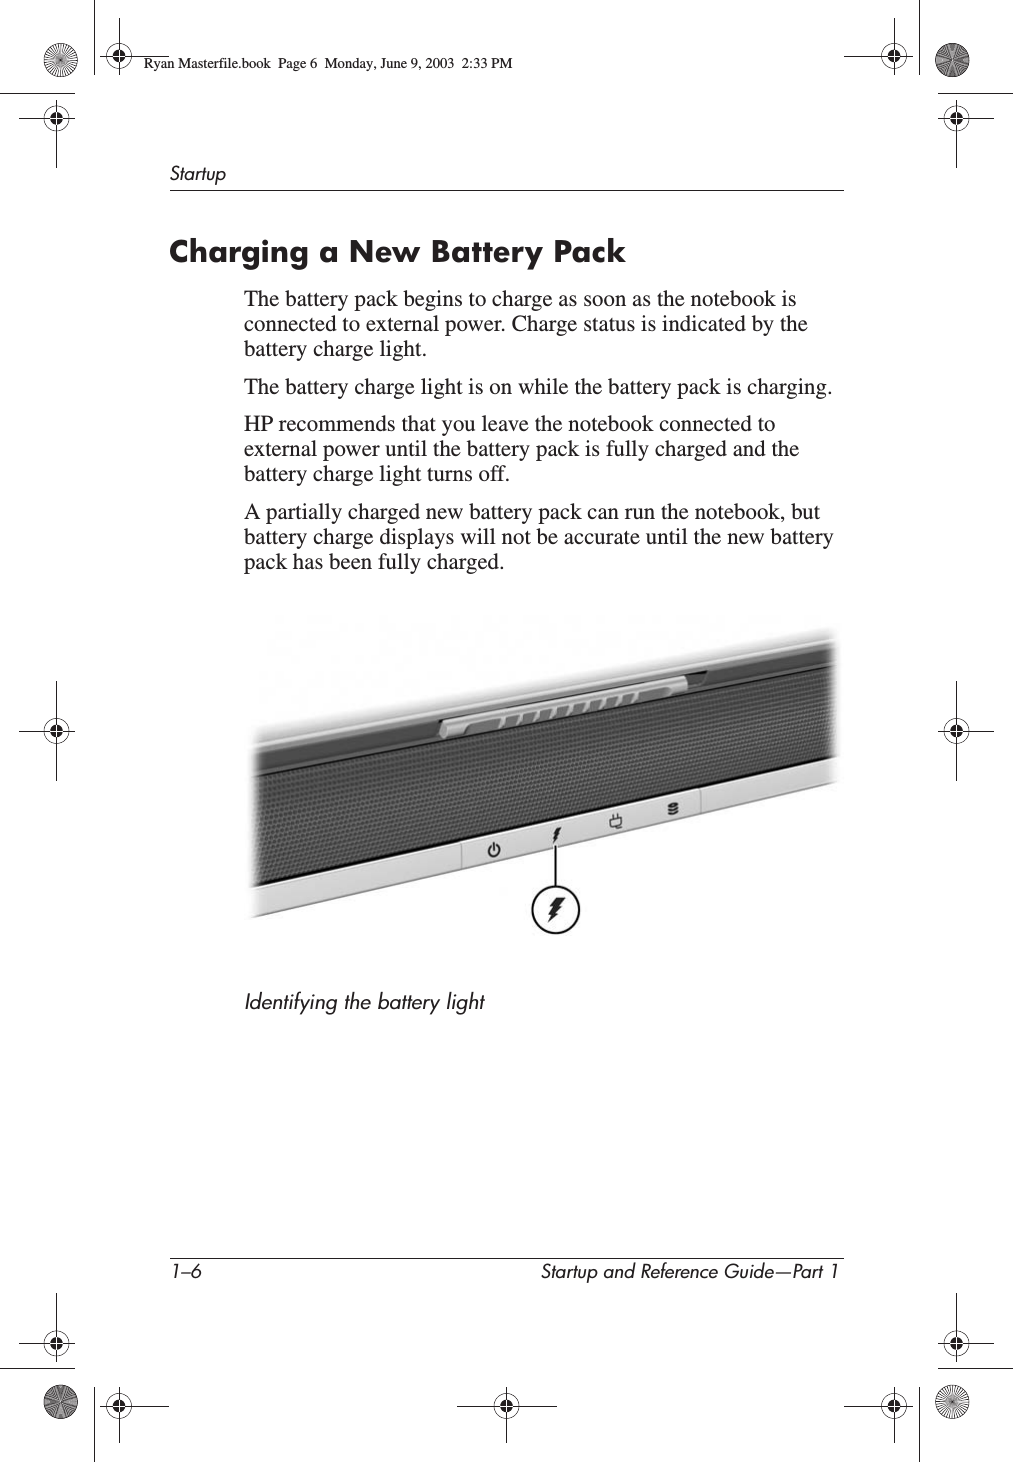 1–6 Startup and Reference Guide—Part 1StartupCharging a New Battery PackThe battery pack begins to charge as soon as the notebook is connected to external power. Charge status is indicated by the battery charge light.The battery charge light is on while the battery pack is charging. HP recommends that you leave the notebook connected to external power until the battery pack is fully charged and the battery charge light turns off.A partially charged new battery pack can run the notebook, but battery charge displays will not be accurate until the new battery pack has been fully charged.Identifying the battery lightRyan Masterfile.book  Page 6  Monday, June 9, 2003  2:33 PM